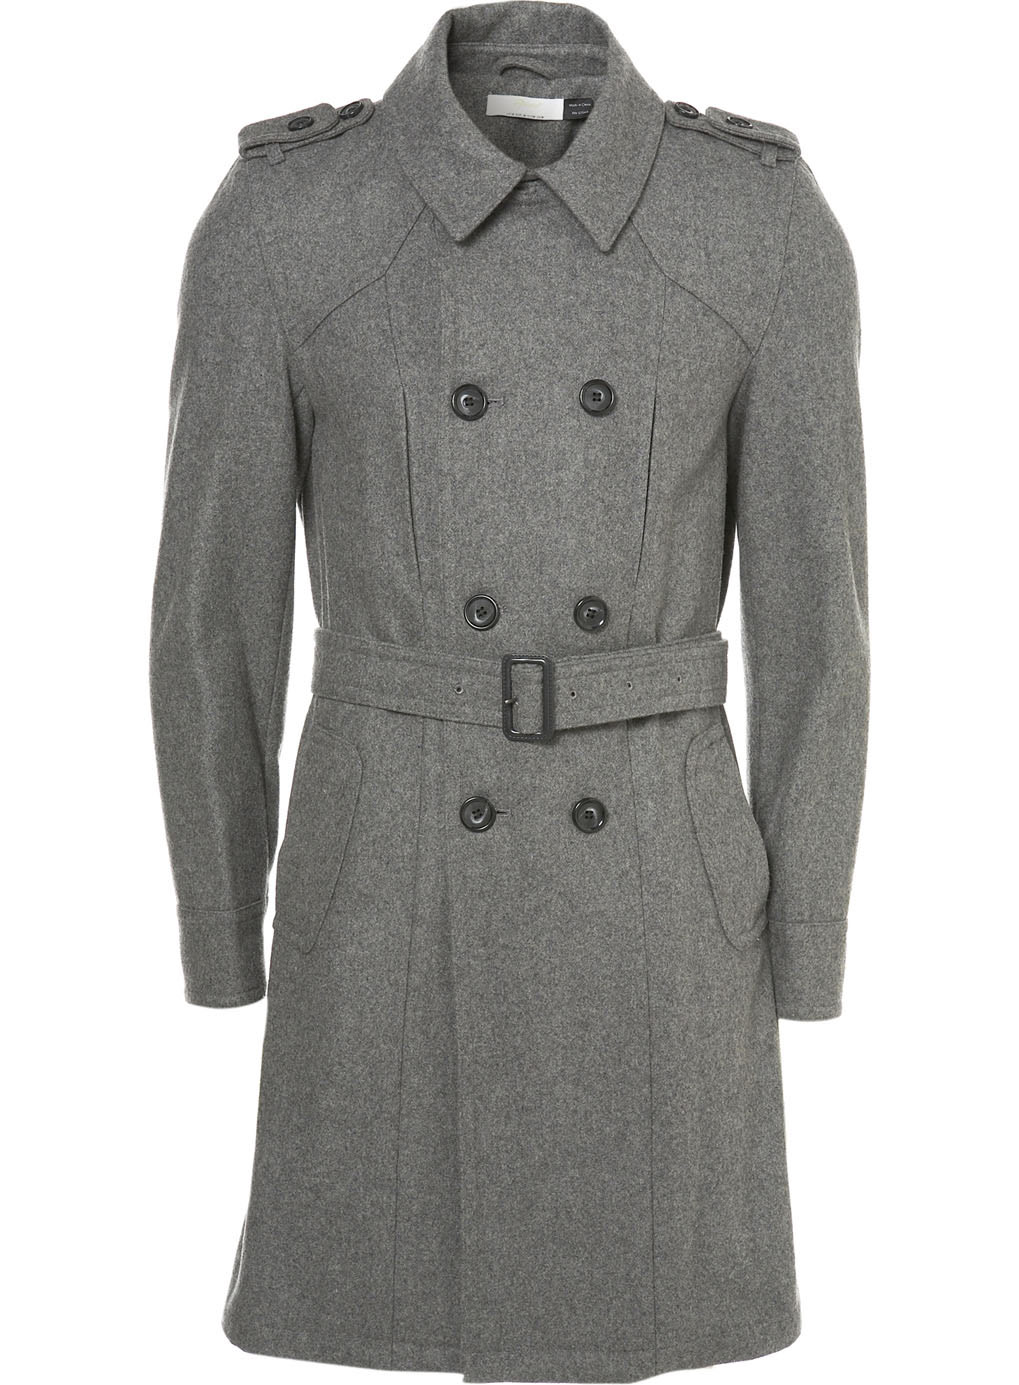 Download this Topman Light Grey Wool... picture